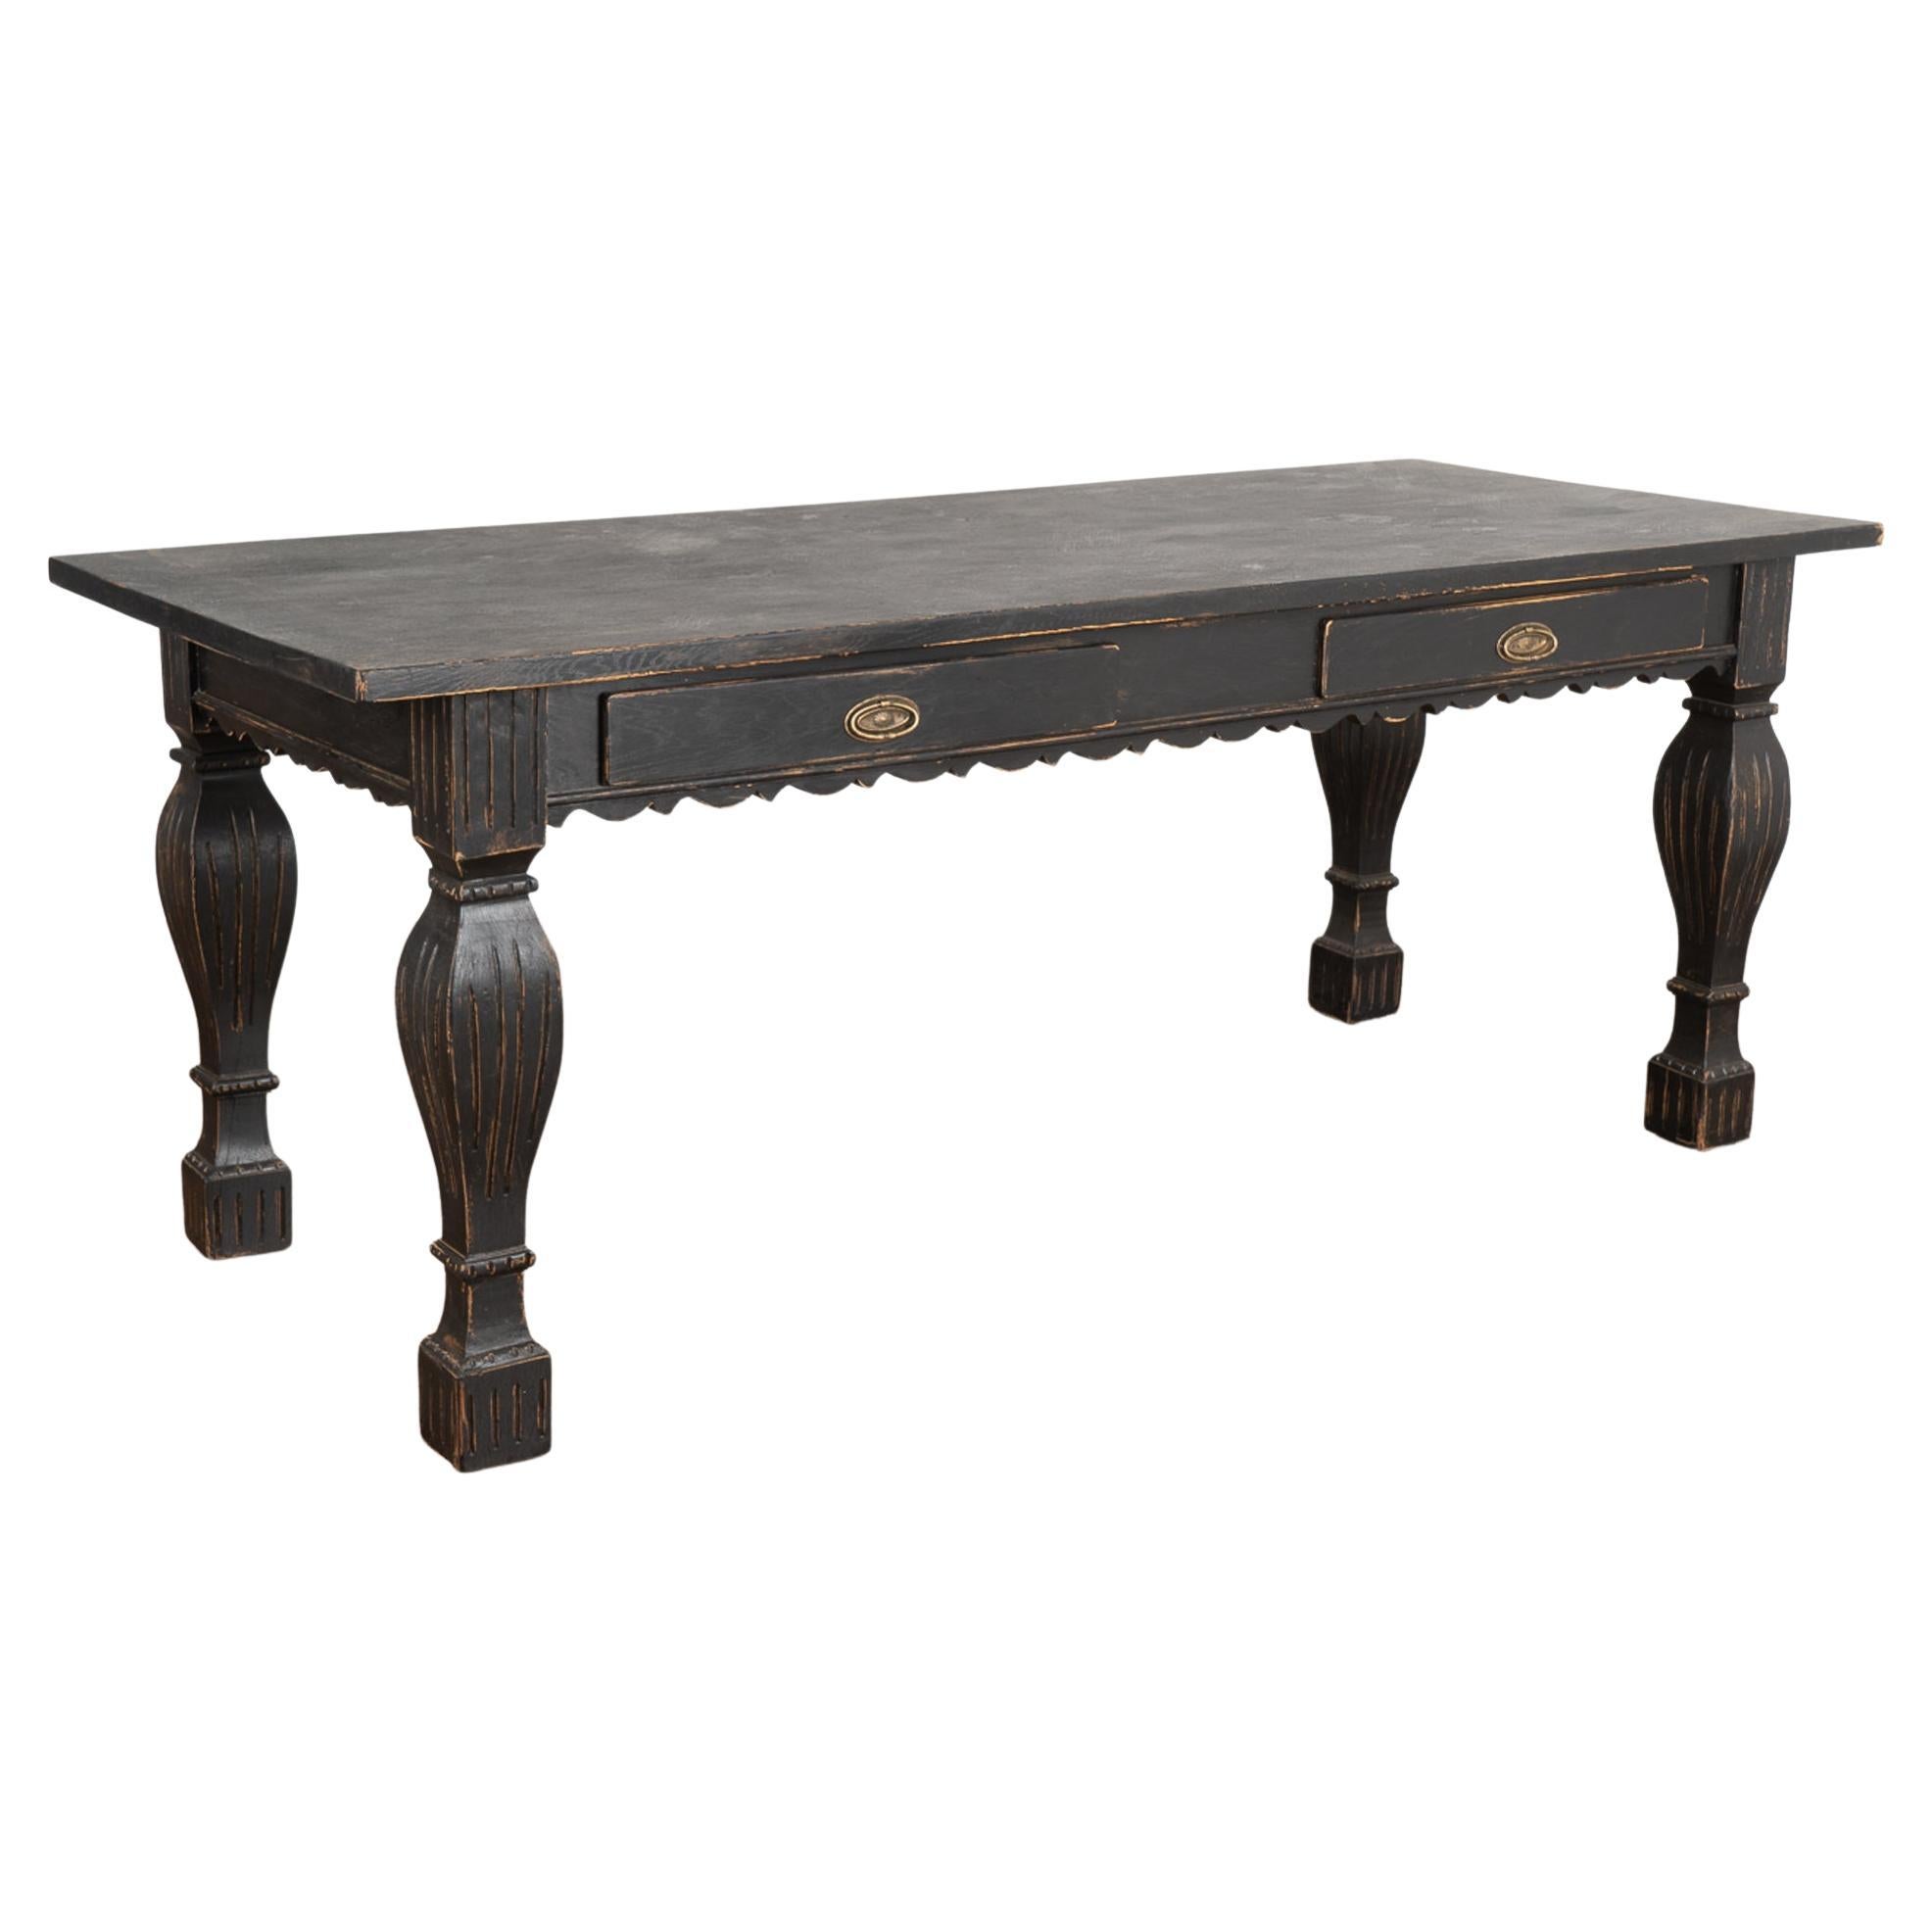 Black Painted Writing Table Console With Two Drawers, Denmark circa 1910